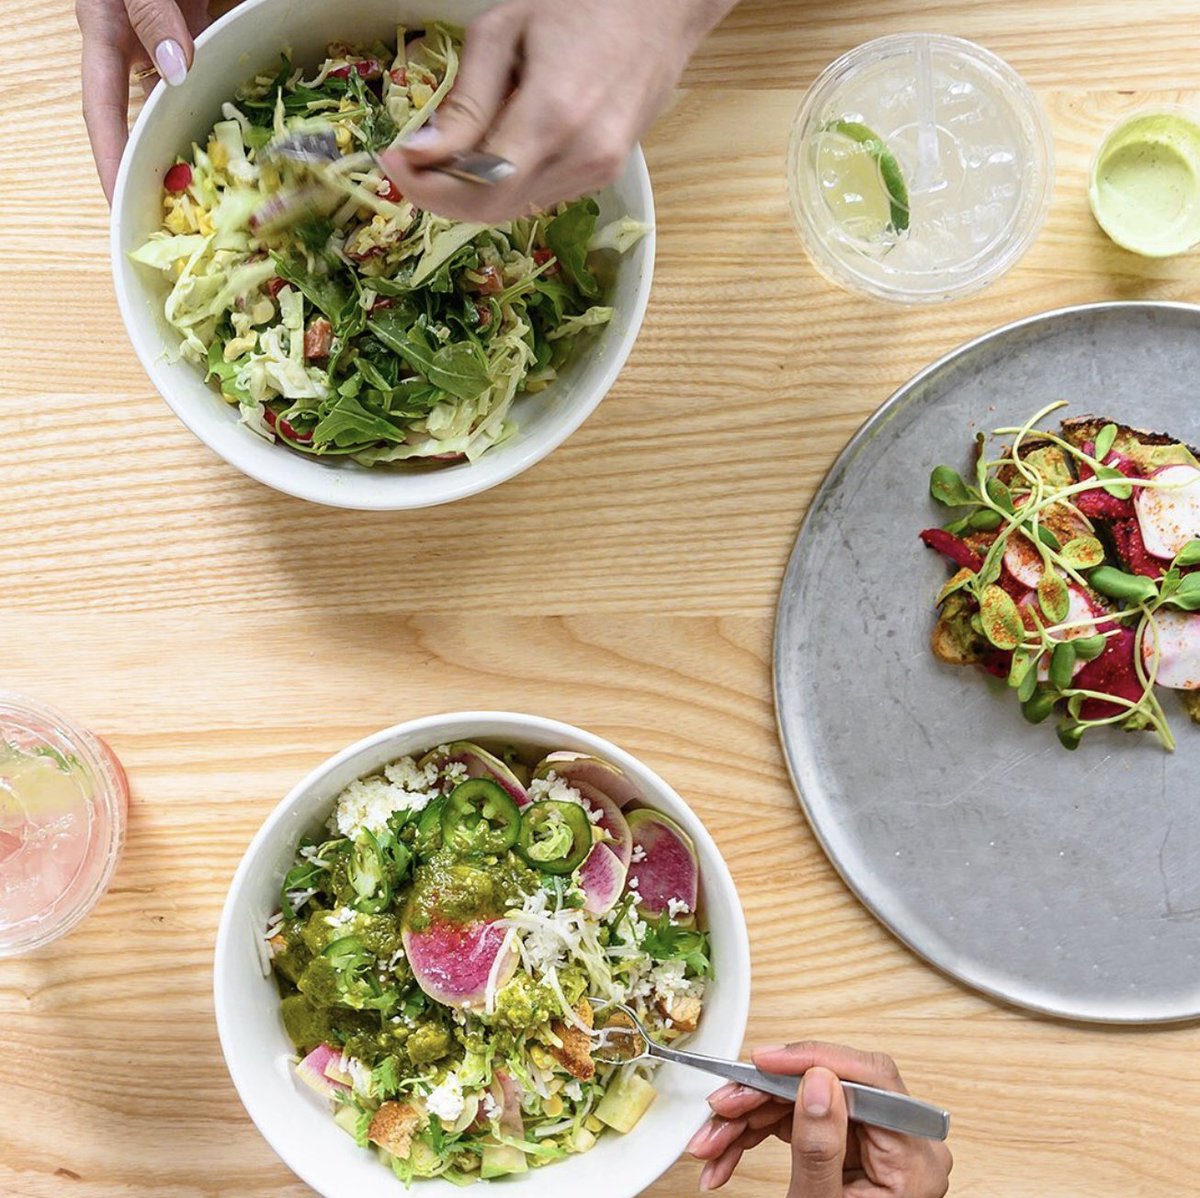 Looking for a quick and healthy lunch option? Visit iQ for delicious salads, toasts, smoothies and sweet treats 😋 #YorkdaleStyle #CentreOfStyle #Healthy #Food #Delicious @iqfoodco